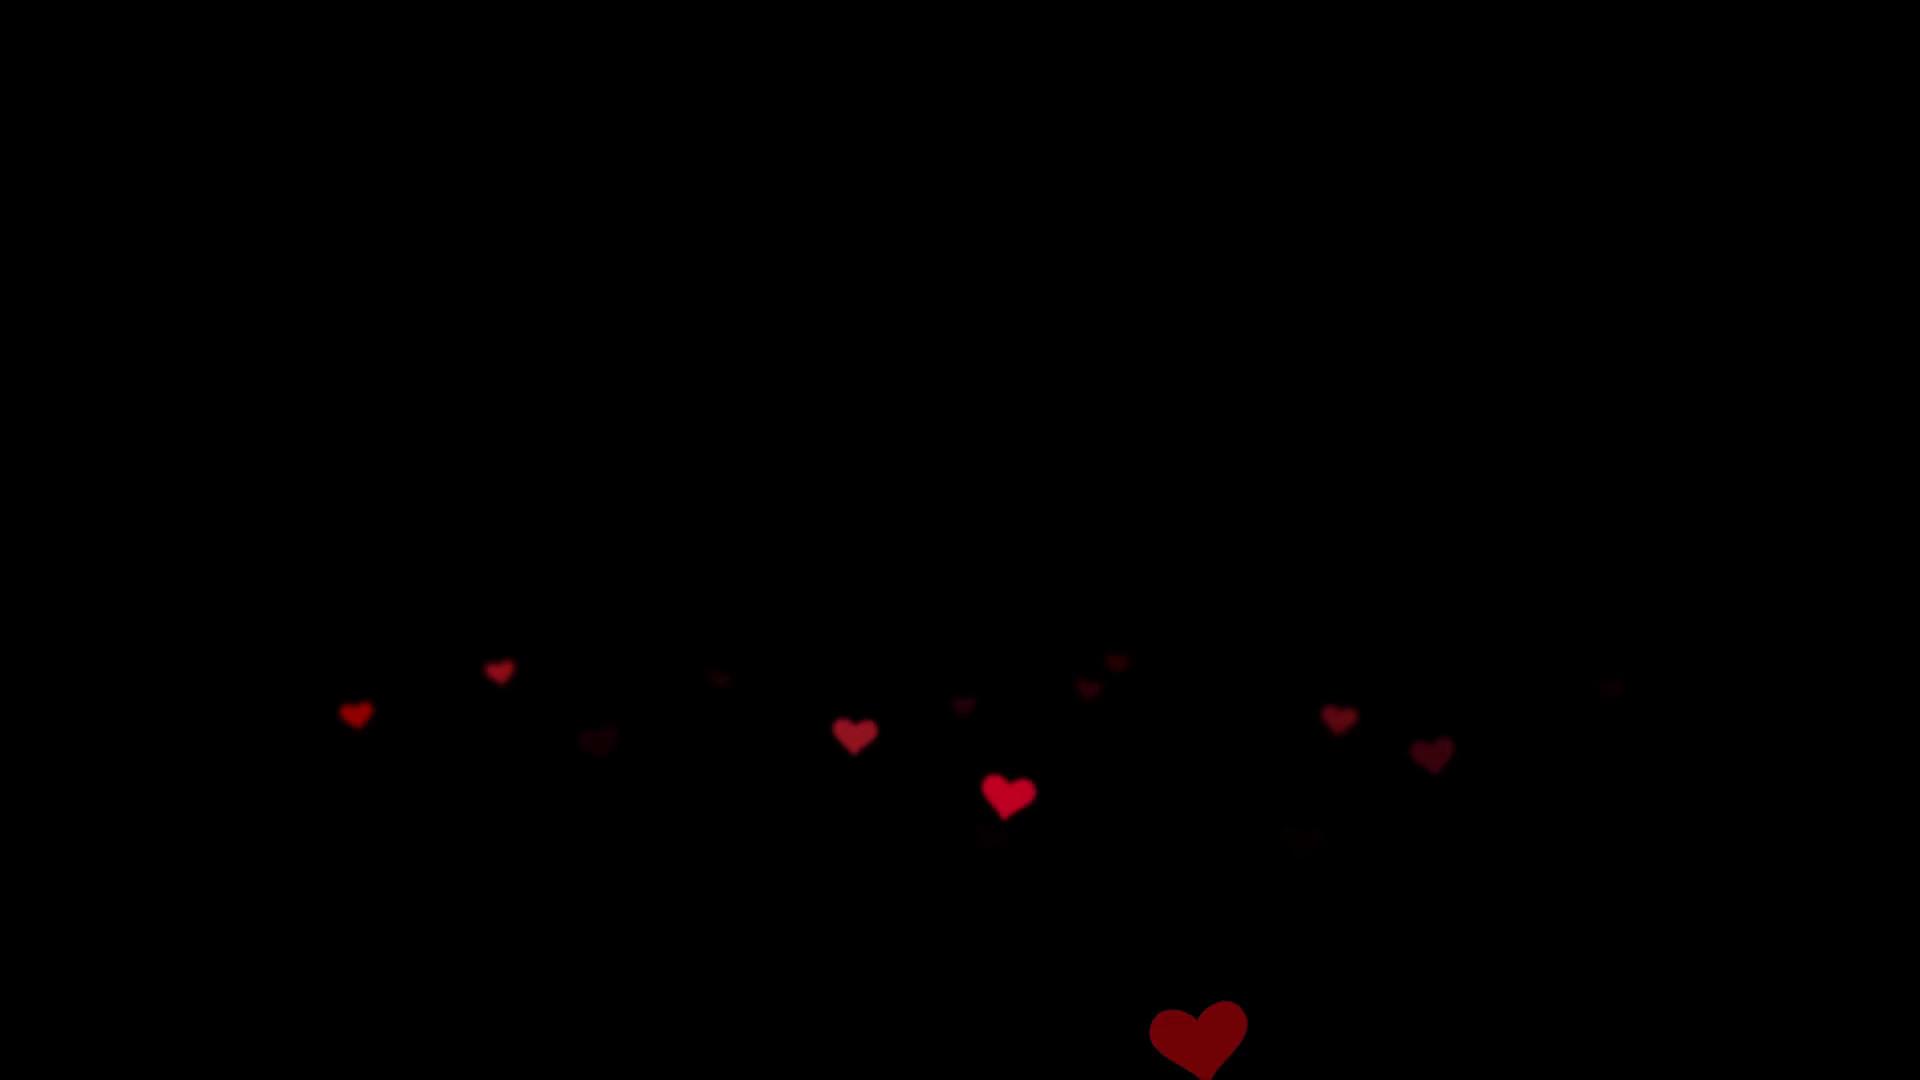 Hearts with Black Background